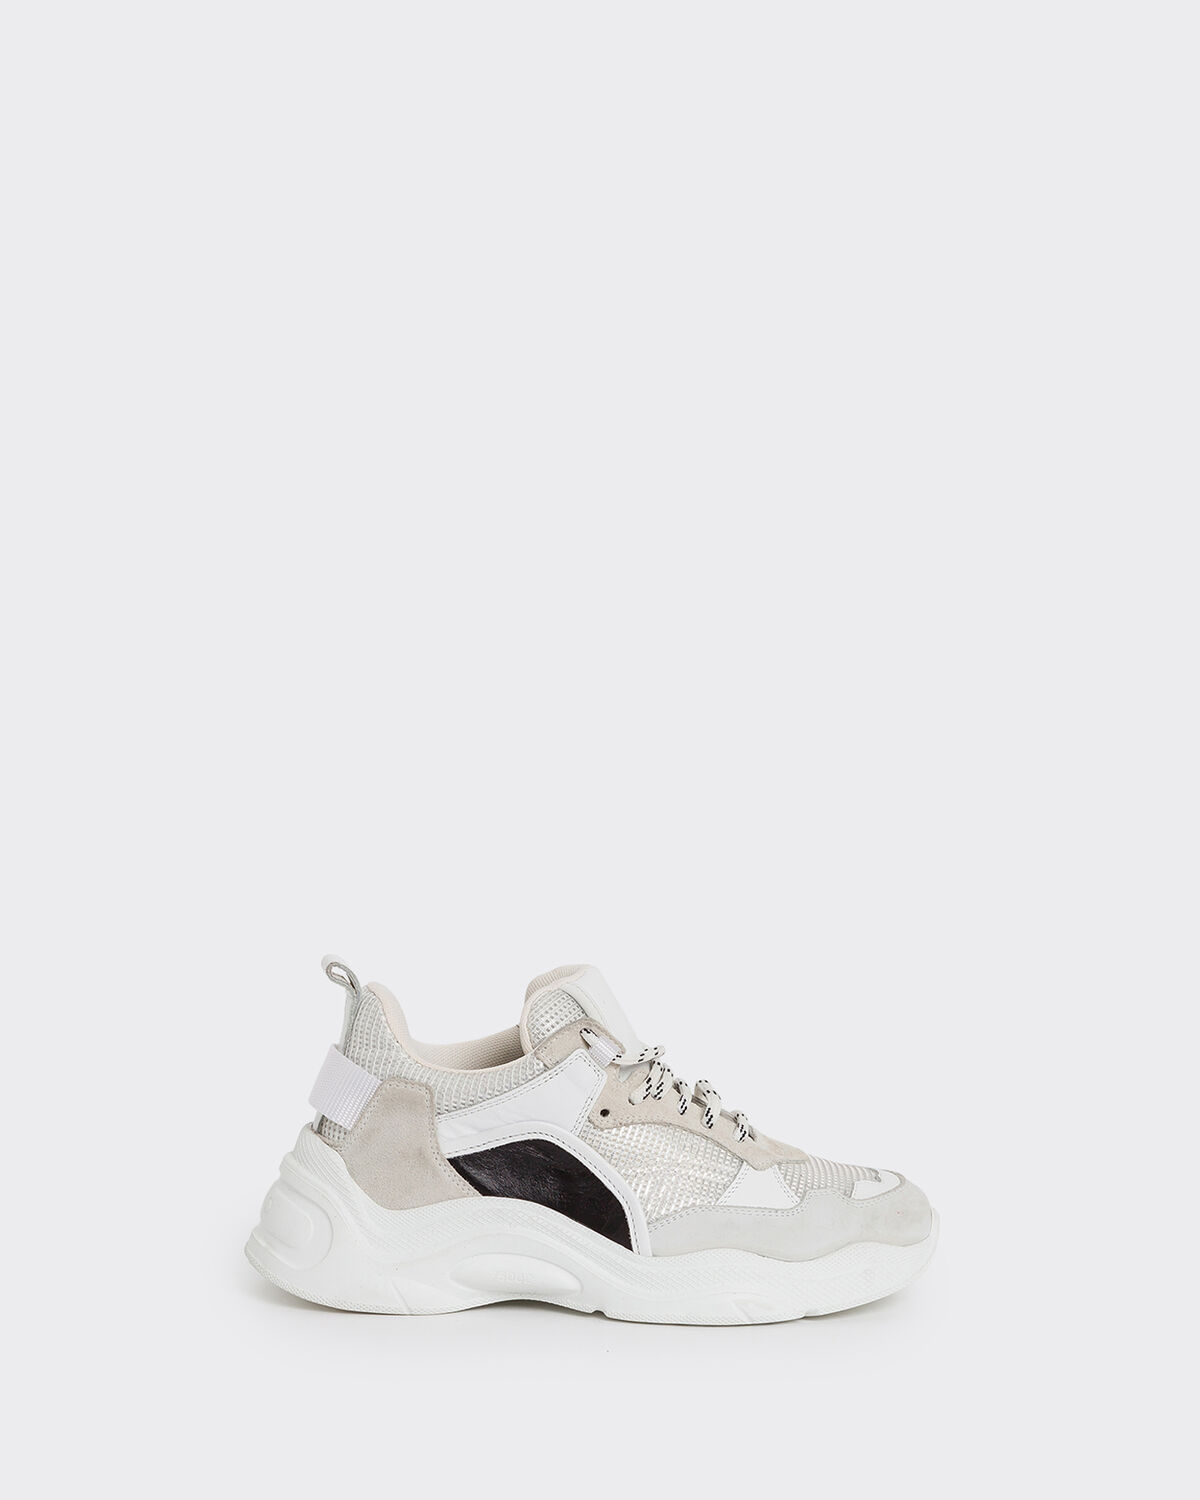 Photo of IRO Paris Curverunner Sneakers Ecru And White - These Sportswear Sneakers Inspired By The 1990s Are Essential To The Iro Cloakroom This Season. Dare To Use Contrasts And Combine This Pair Of Dad Shoes With A Small Fluid Dress. Choose The Size Below Your Usual One. Fall Winter 19